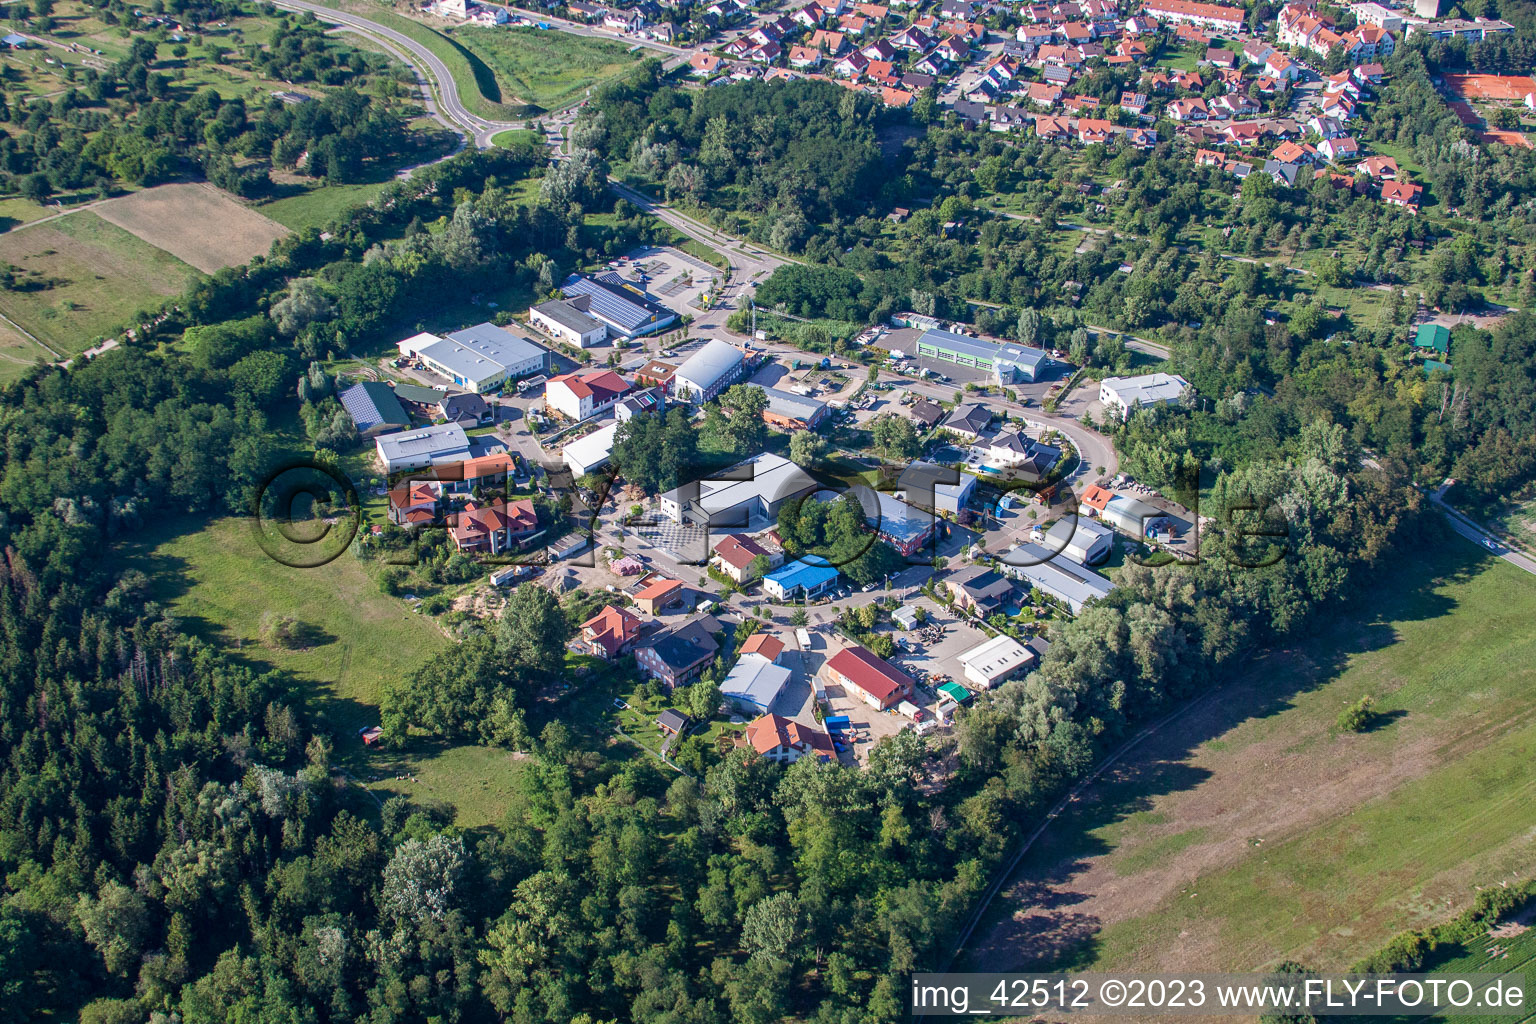 SW commercial area in Jockgrim in the state Rhineland-Palatinate, Germany from above